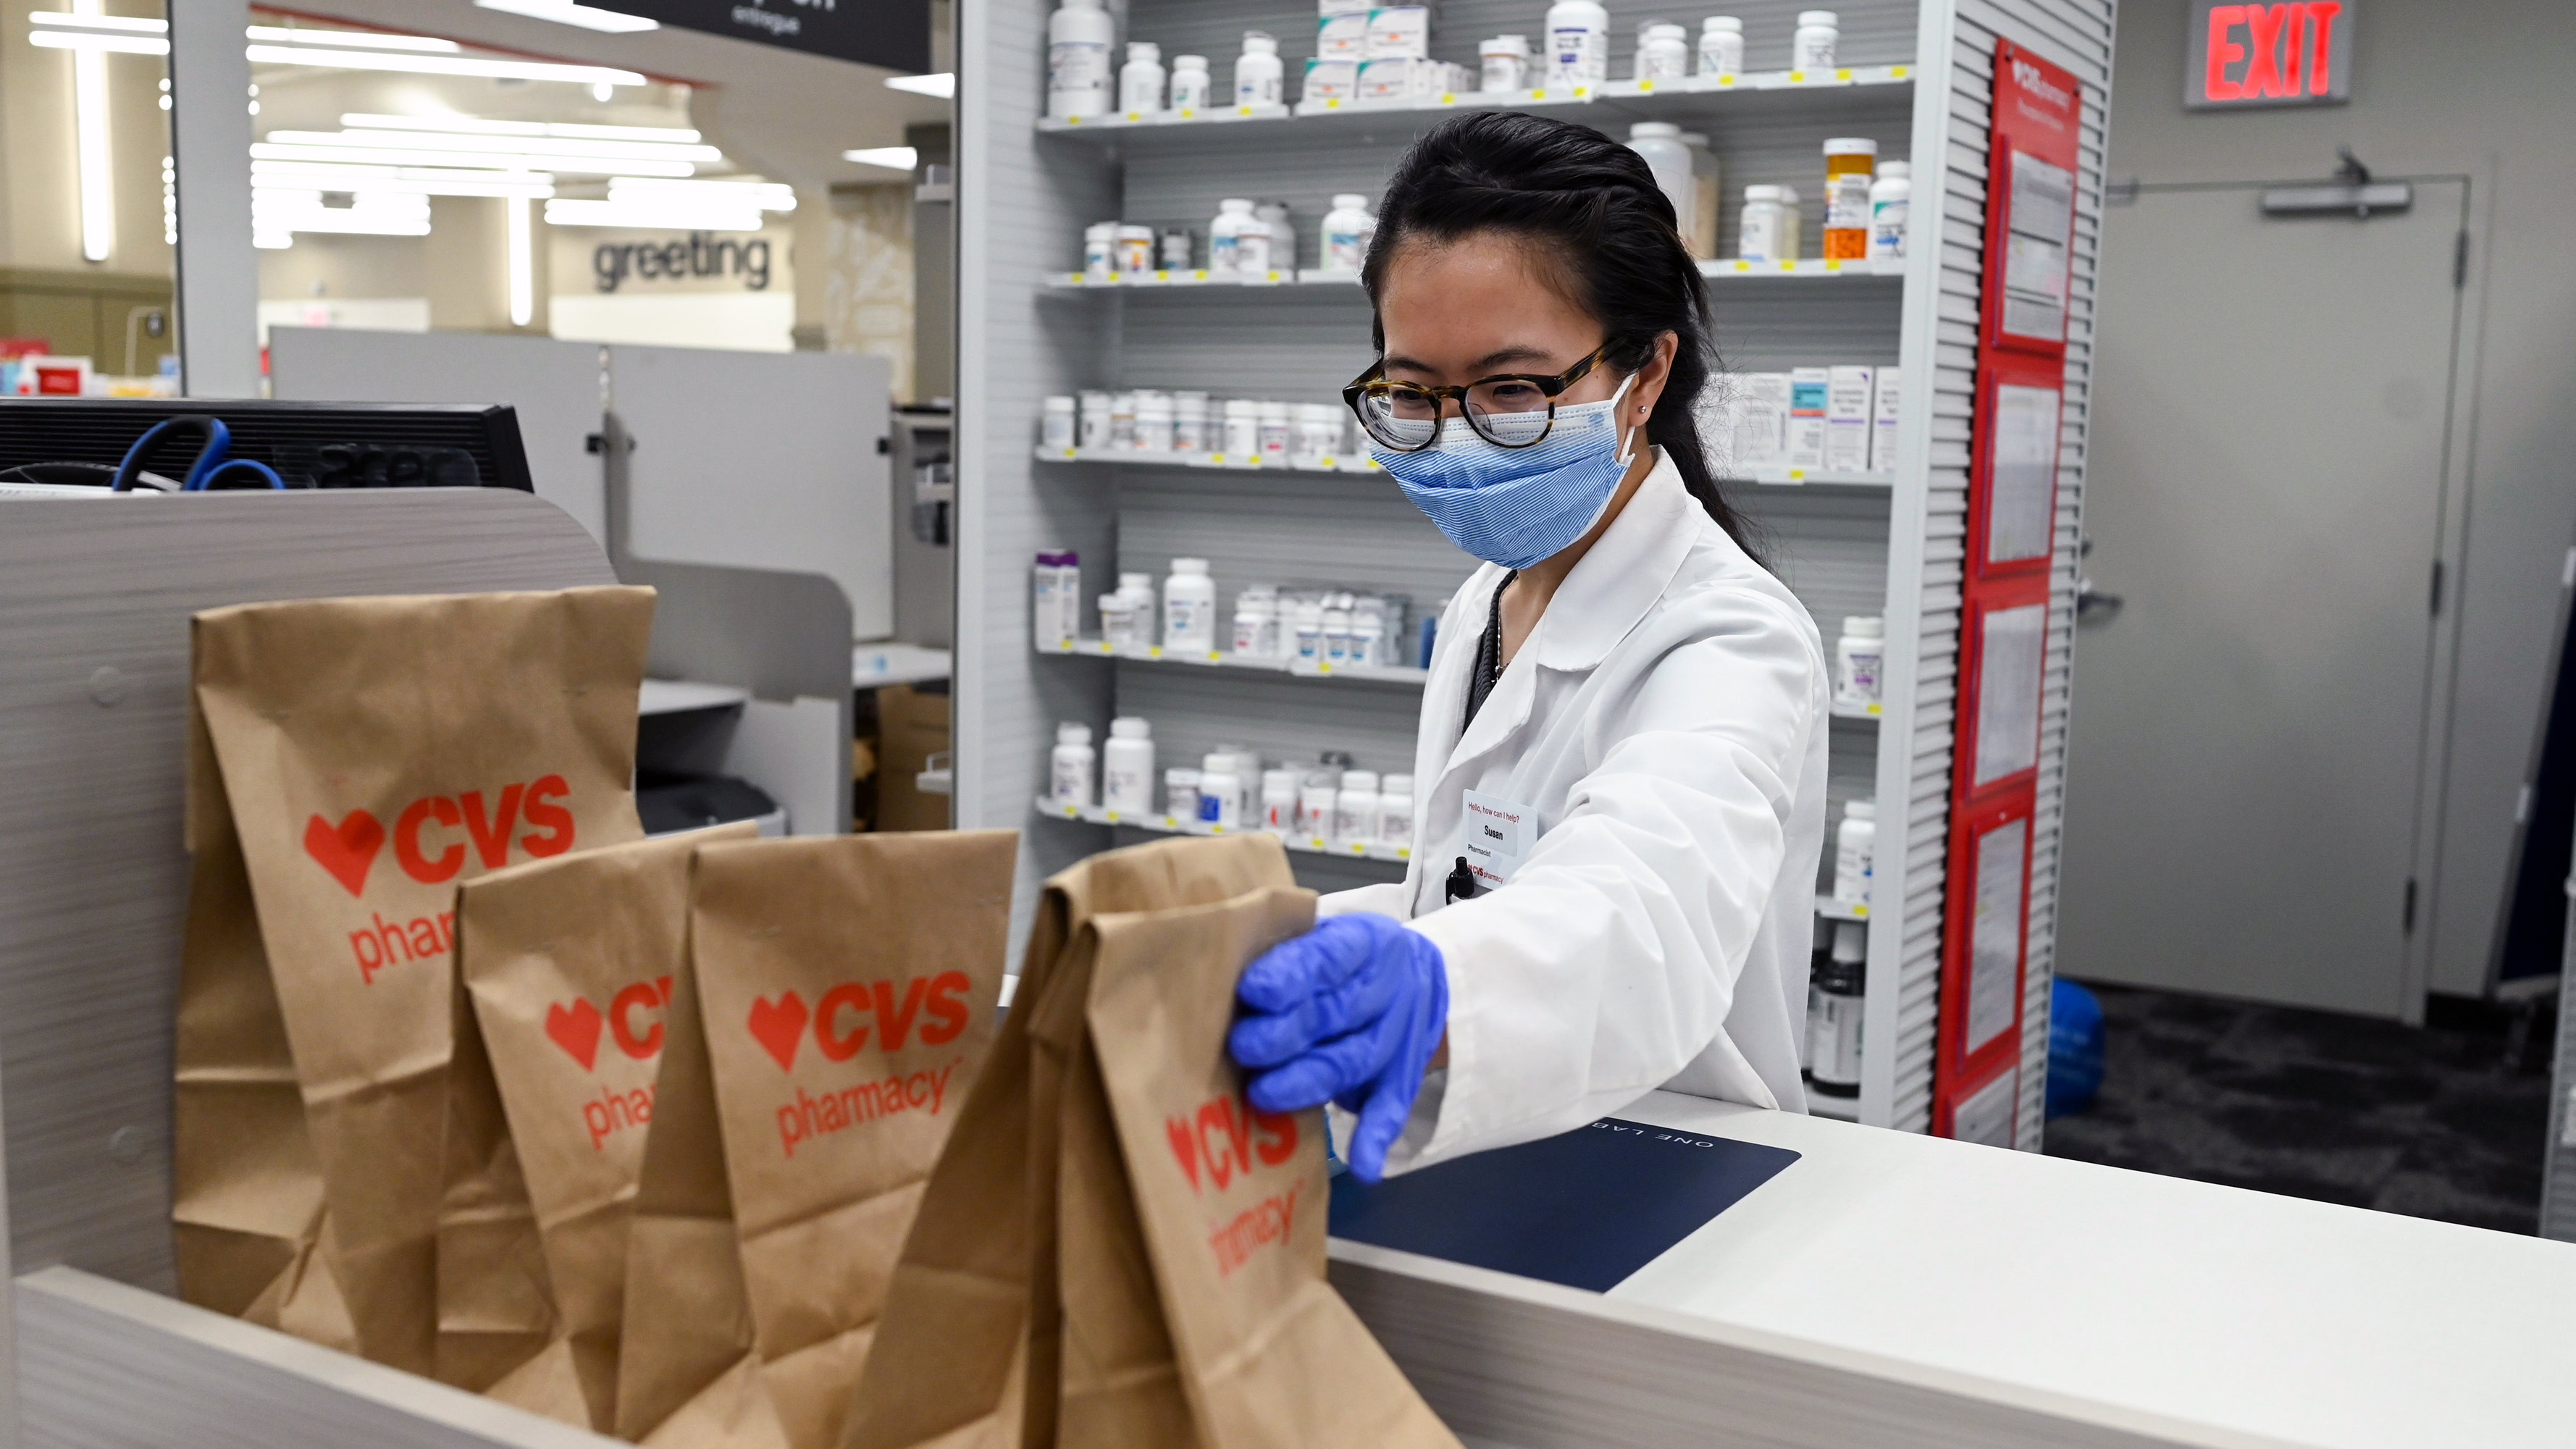 A CVS pharmacist prepares prescriptions while wearing personal protective equipment (PPE).